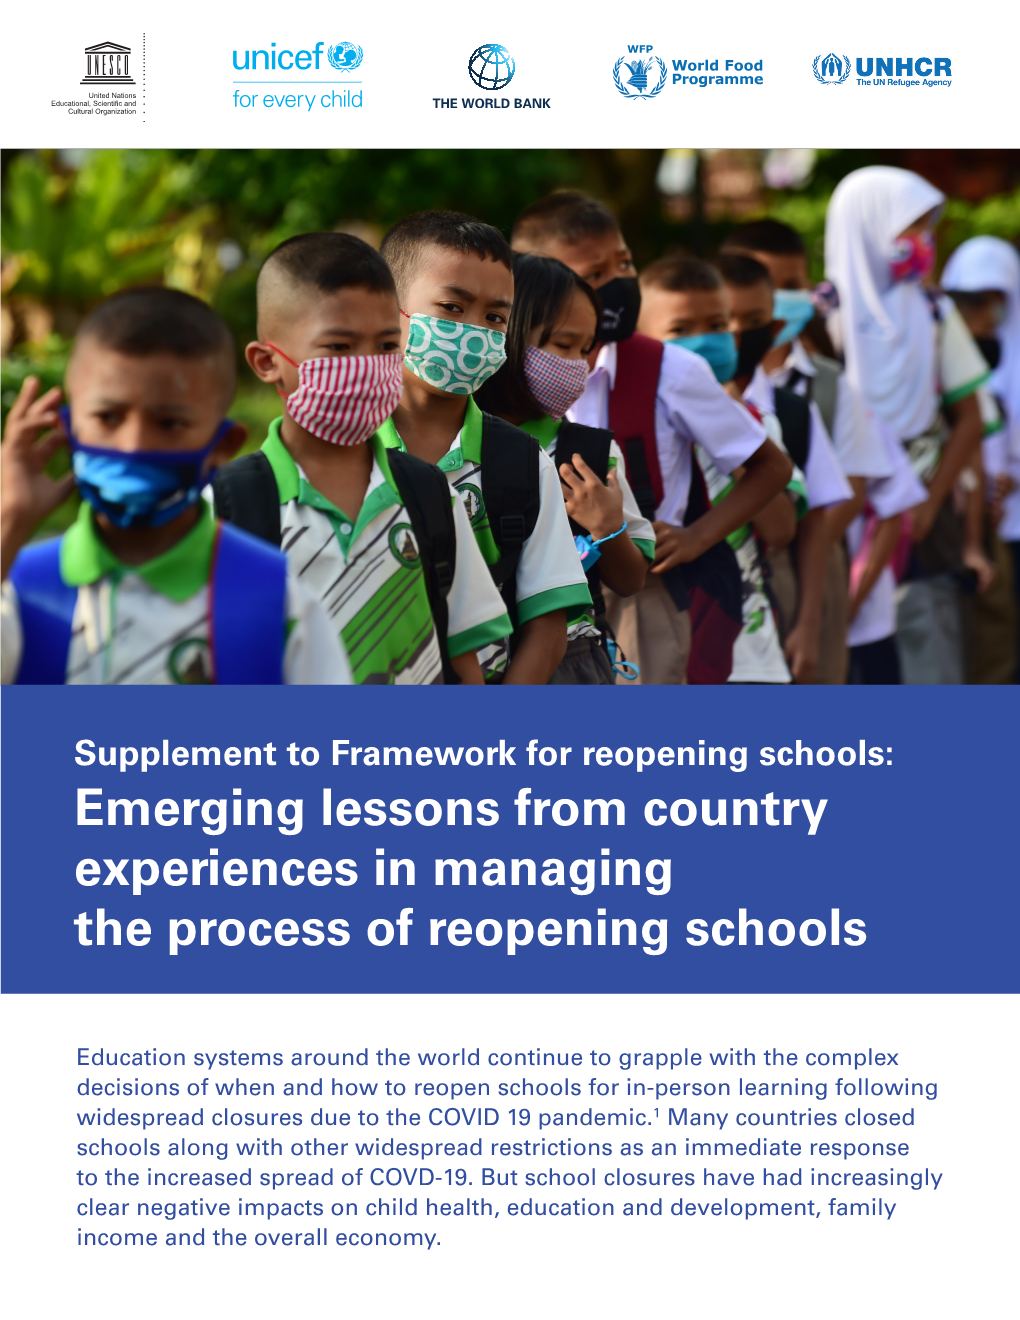 Emerging Lessons from Country Experiences in Managing the Process of Reopening Schools